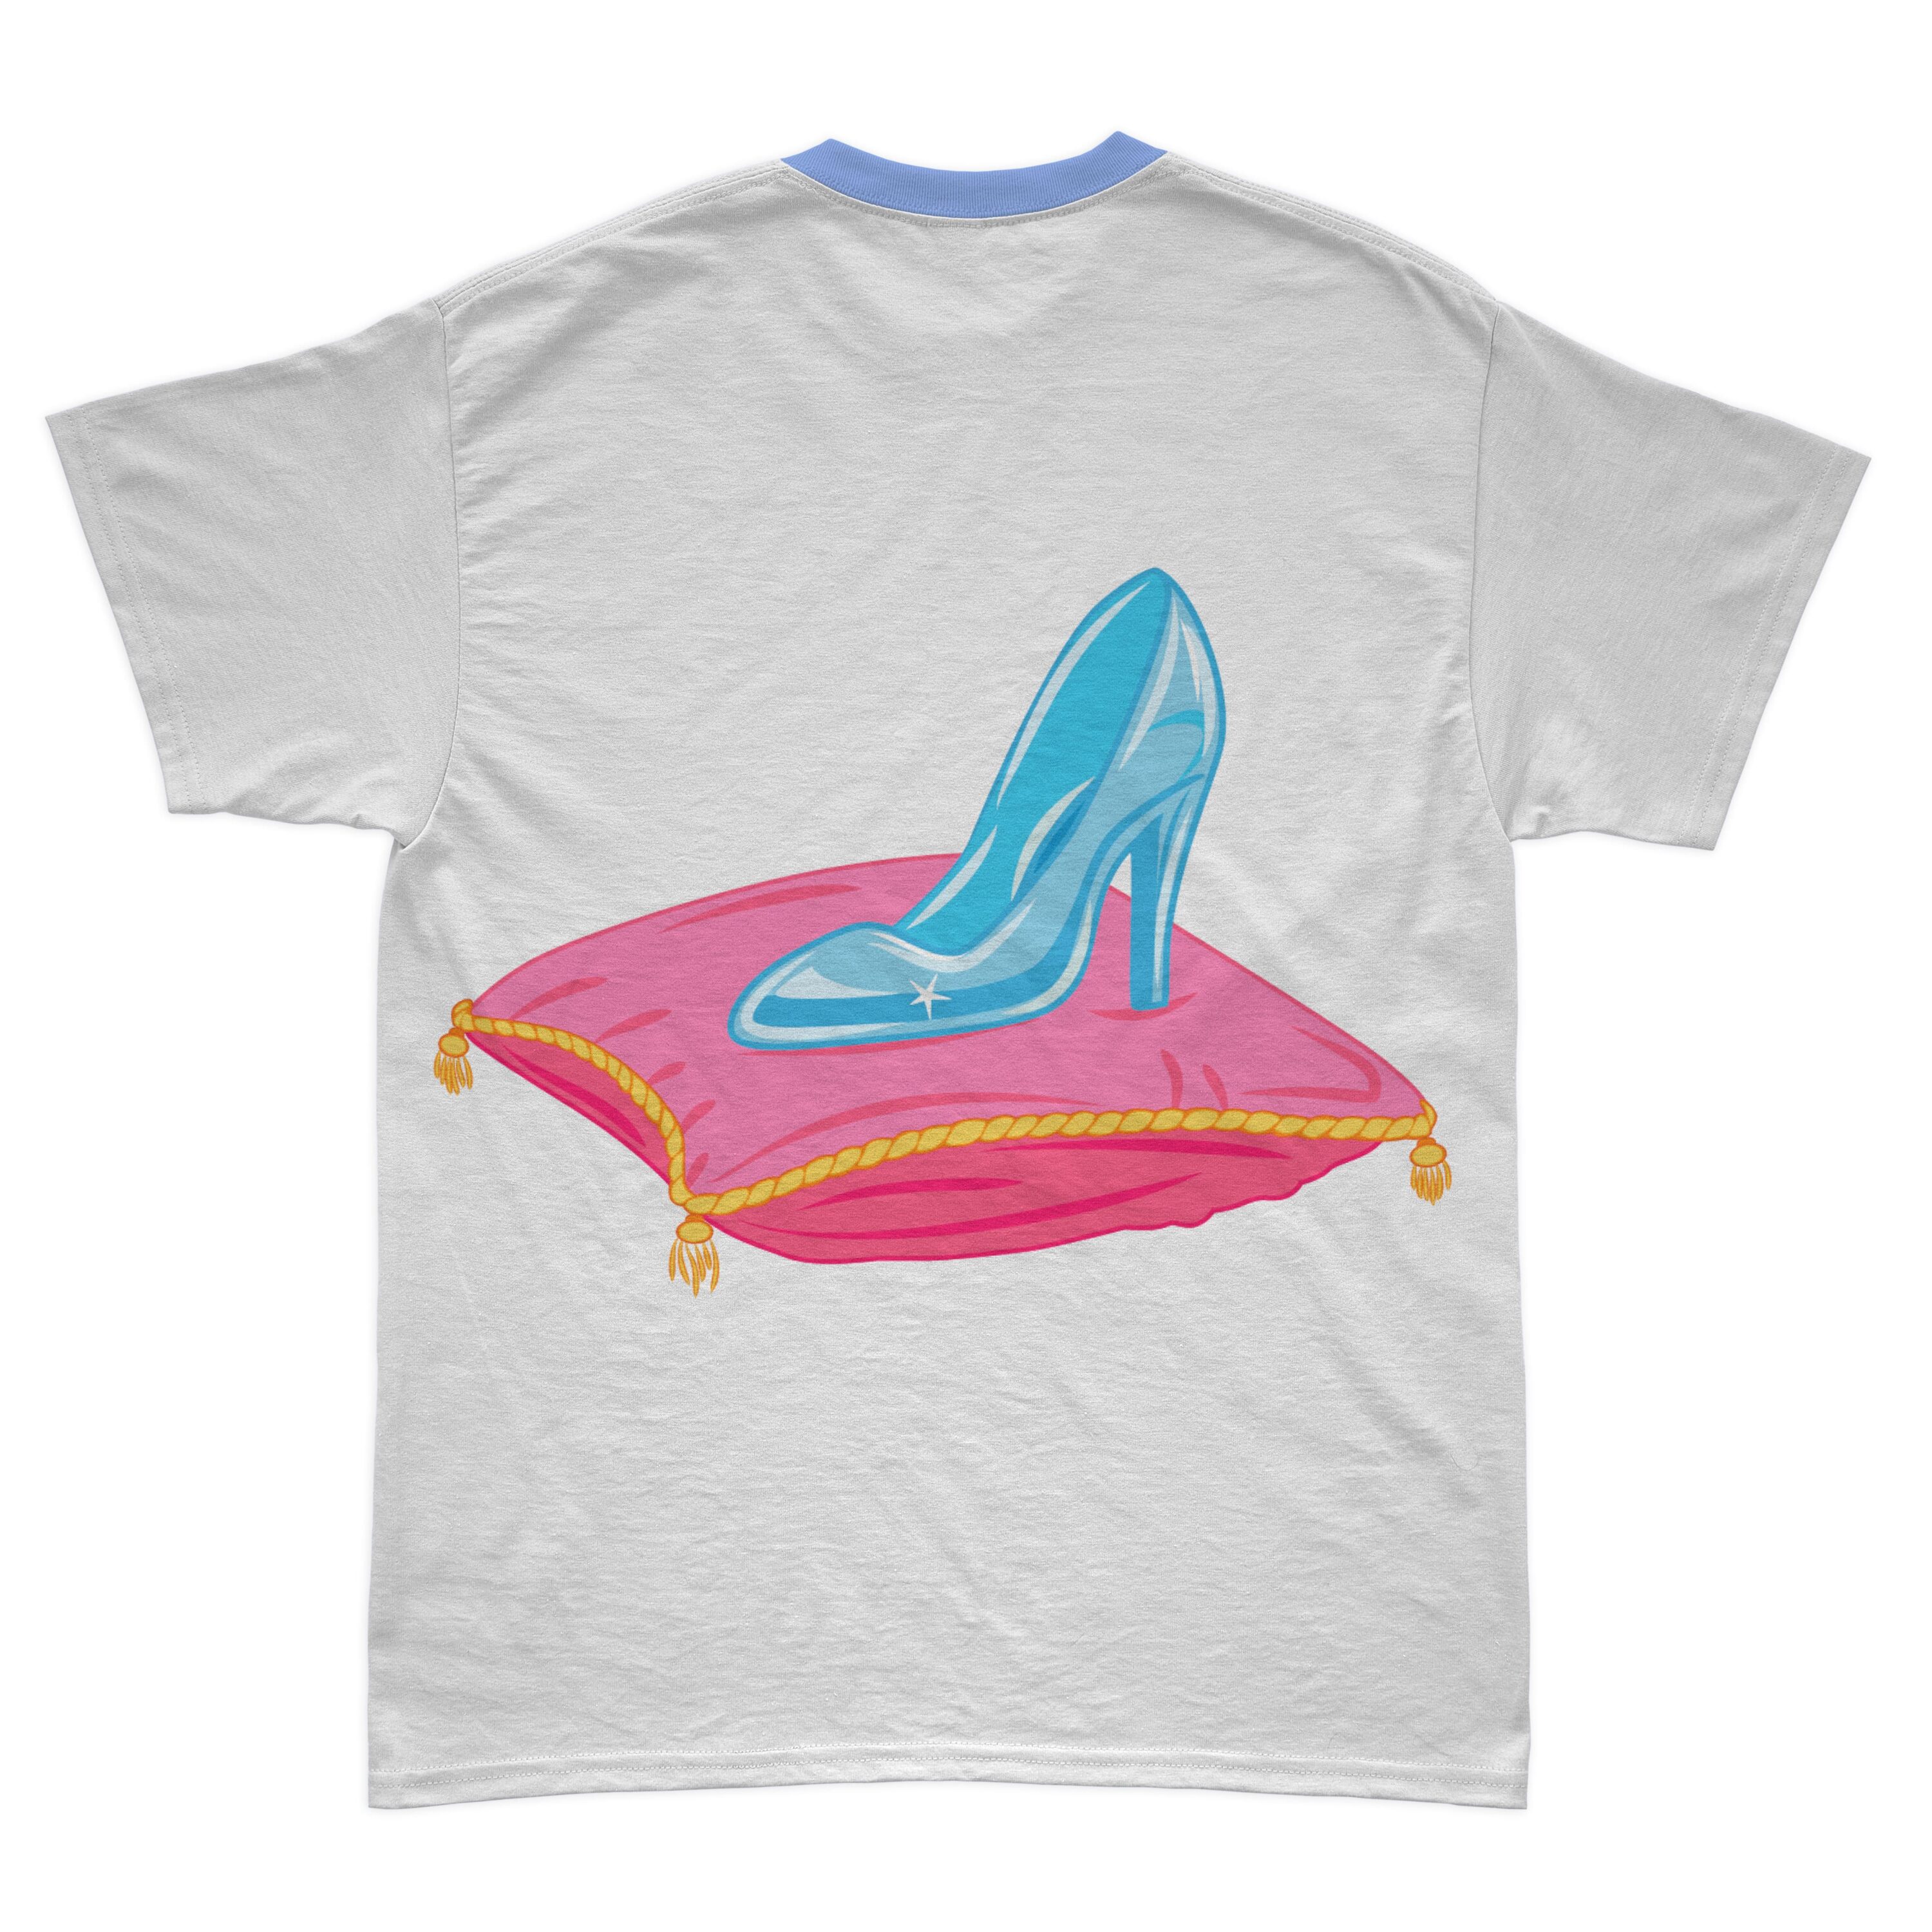 Picture of a white t-shirt with a cartoon print of Cinderella's shoe.